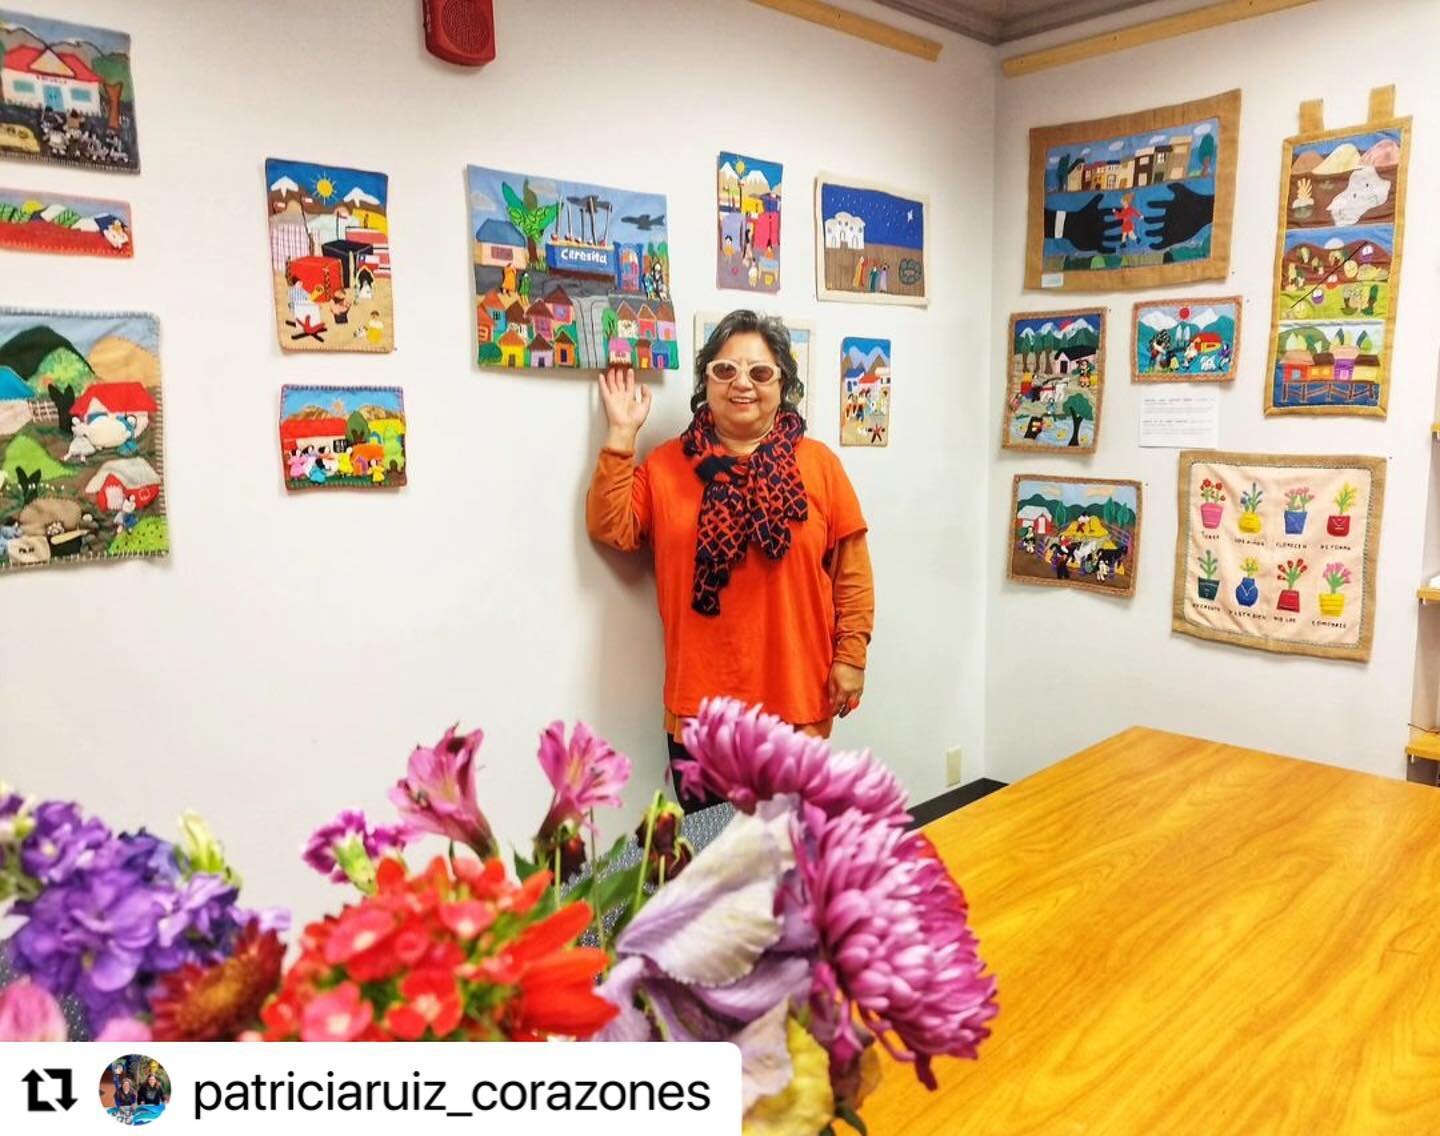 Textile Exhibition Opening today! 
Hearts: not one less (To embroider is an Act of Infinite Memory)
3:30 Luddy Hall, IU campus 
Work from the amazing Chilean textile artist and human rights activist @patriciaruiz_corazones 
My friend and colleague @a